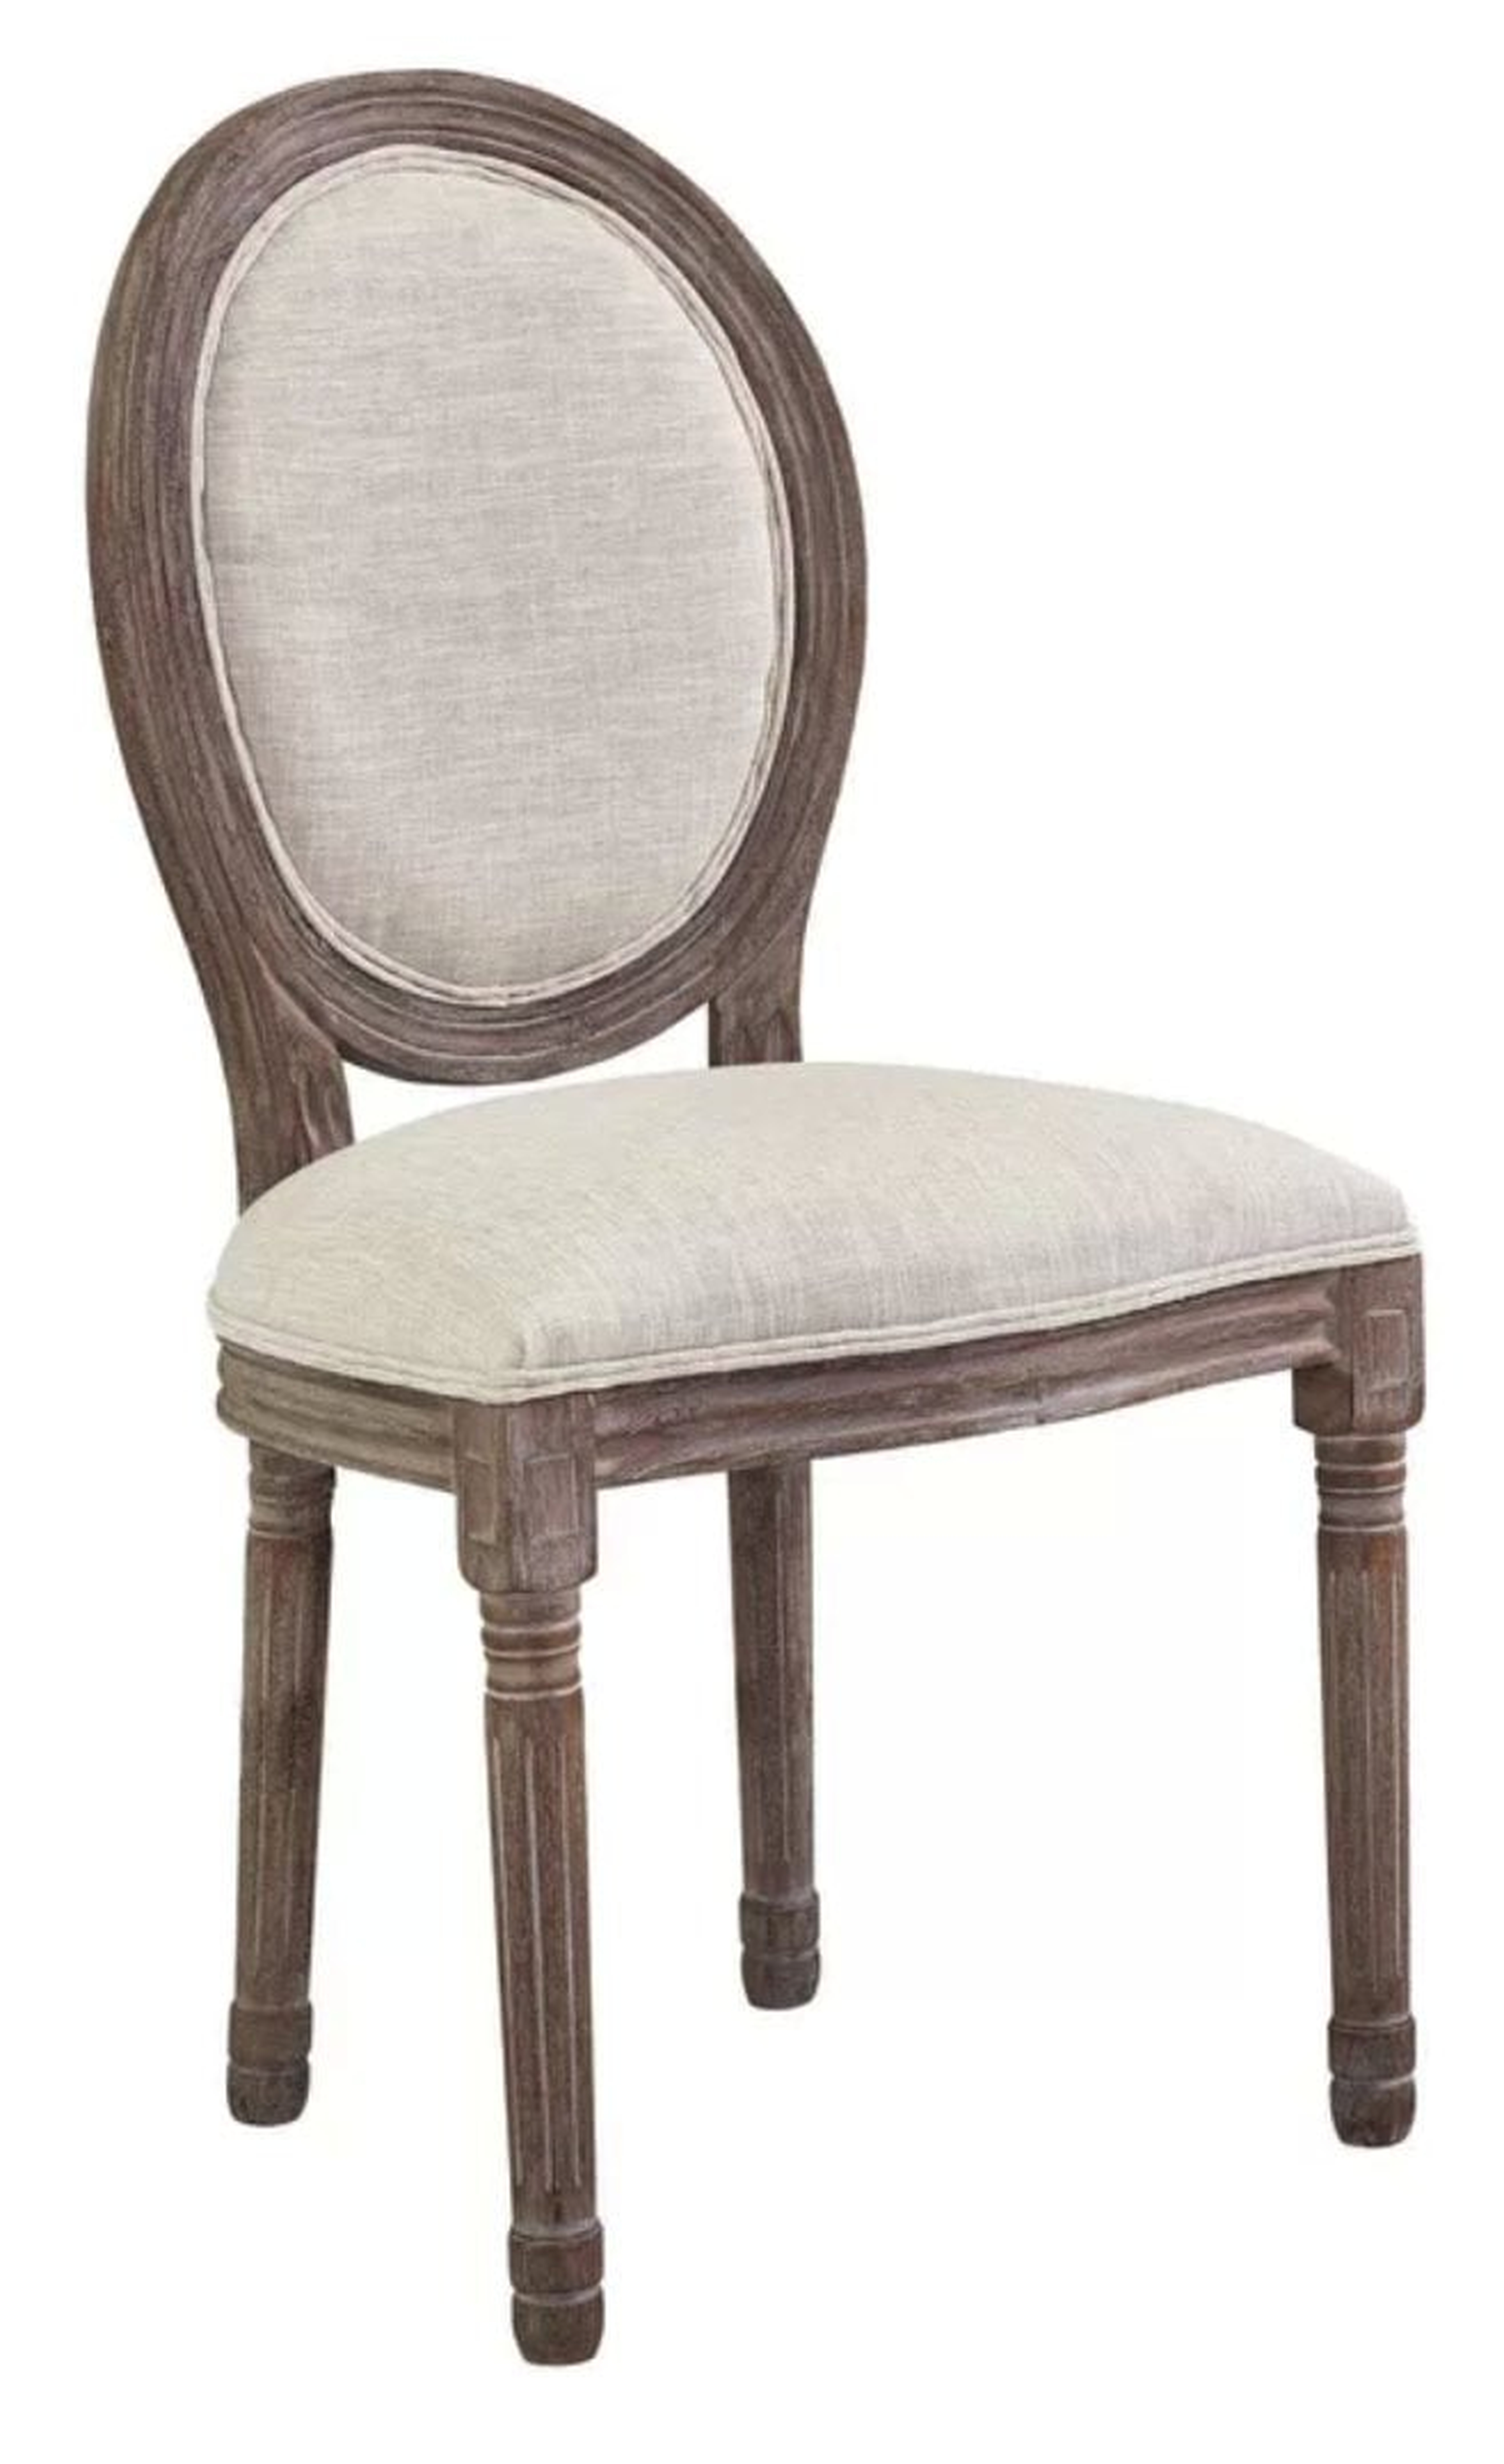 Vicente French Upholstered Dining Chair - Wayfair